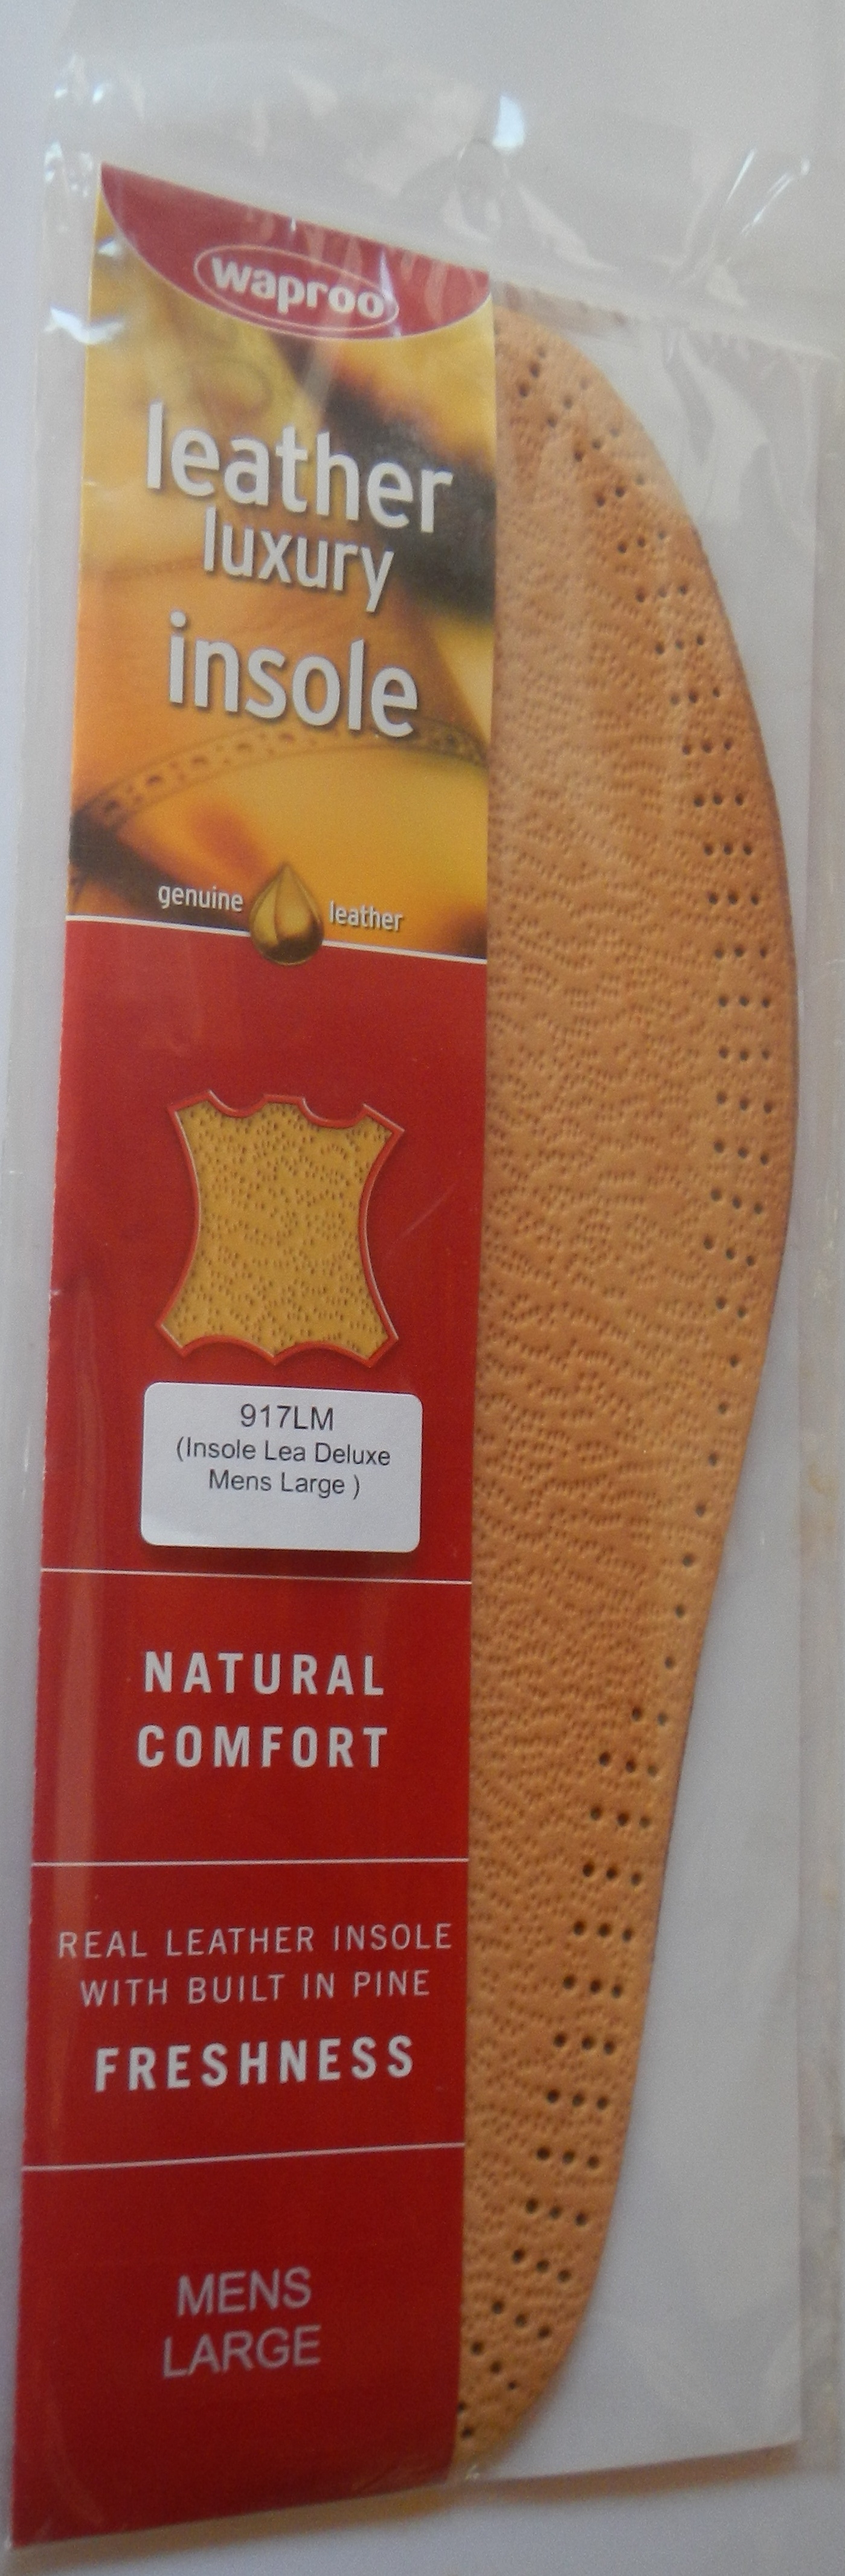 Leather Full Insole Waproo